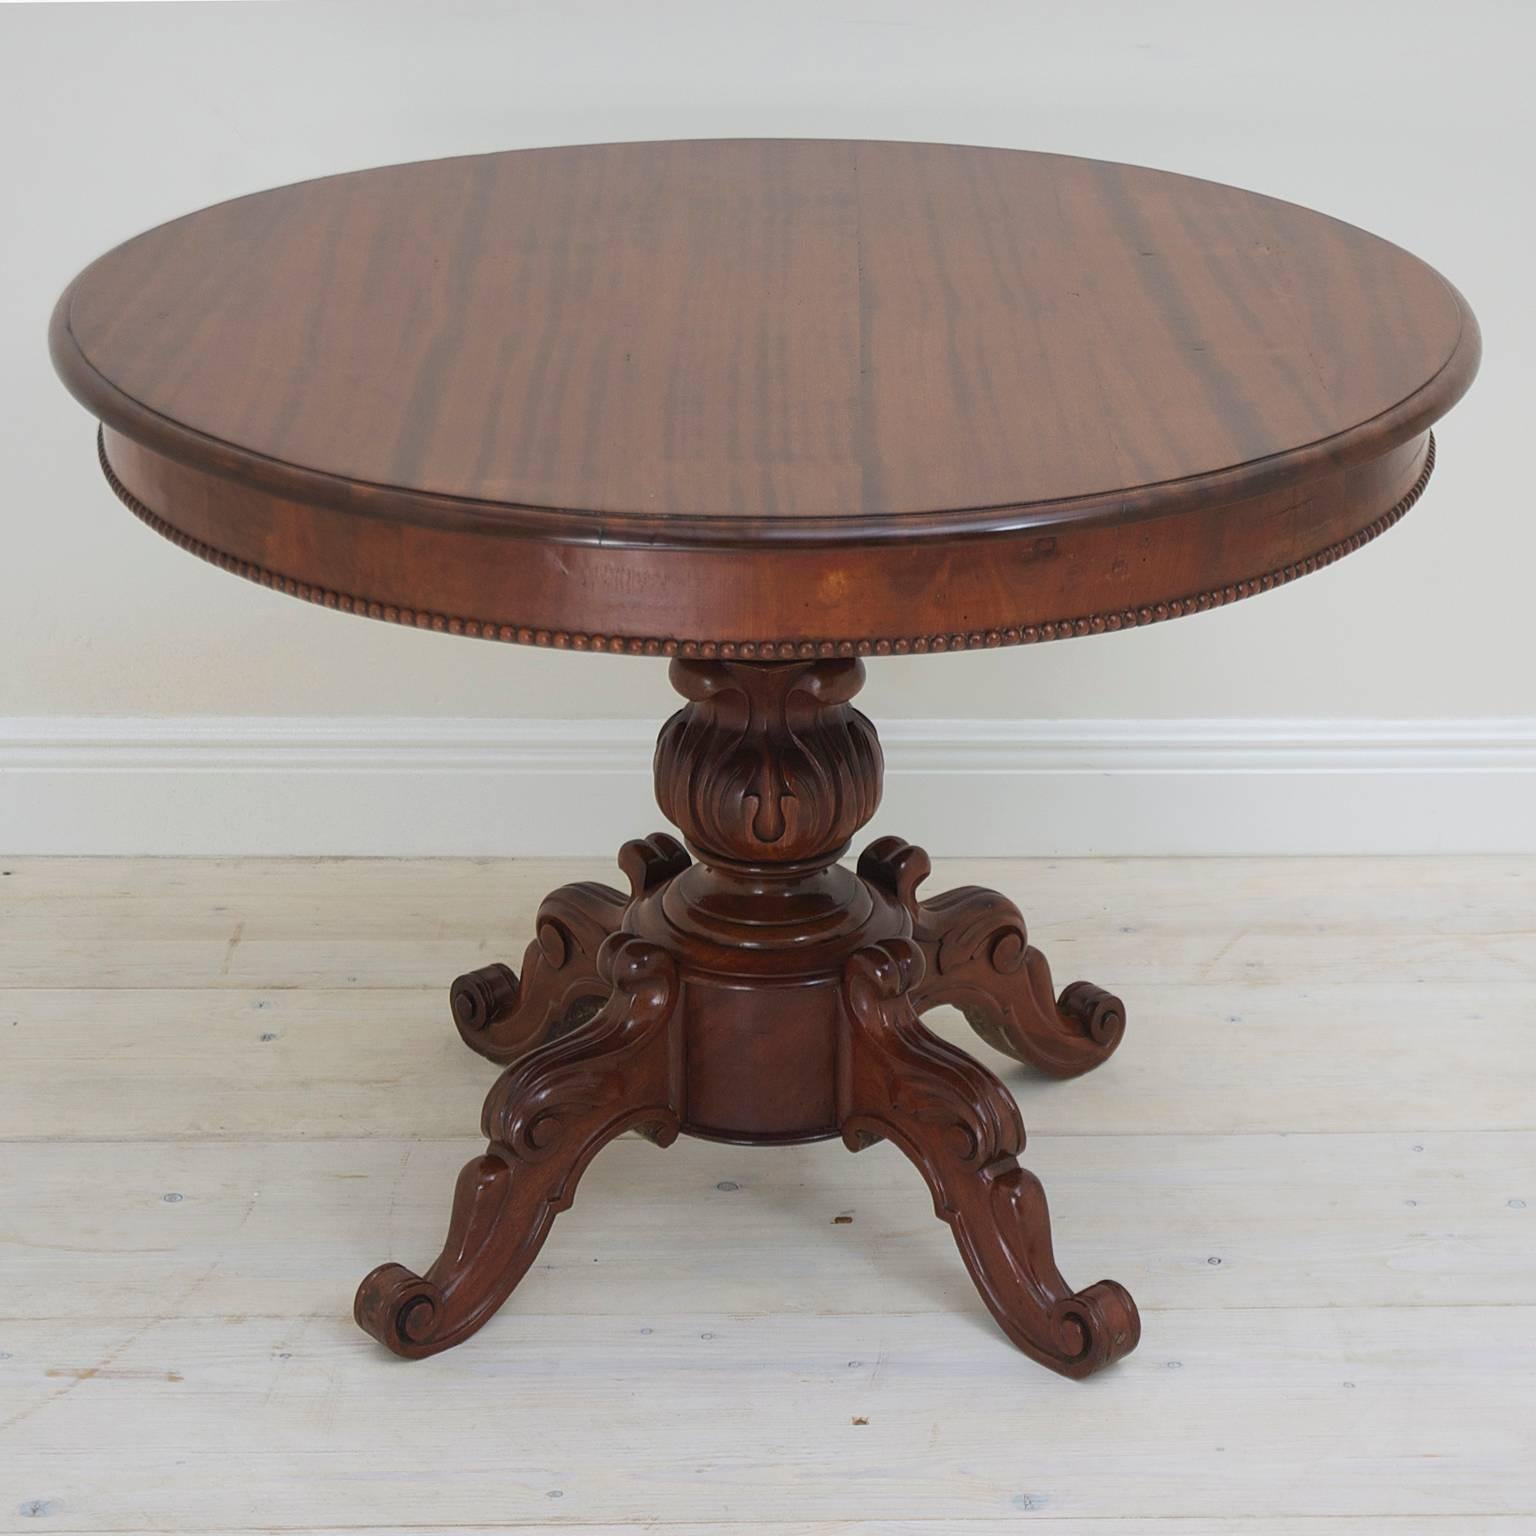 A fine Louis Philippe center or end table in mahogany with round top resting on baluster-turned pillar with carved foliate design and ending in four carved legs with scrolled feet. France, circa 1835.

Makes a beautiful end table, or a center